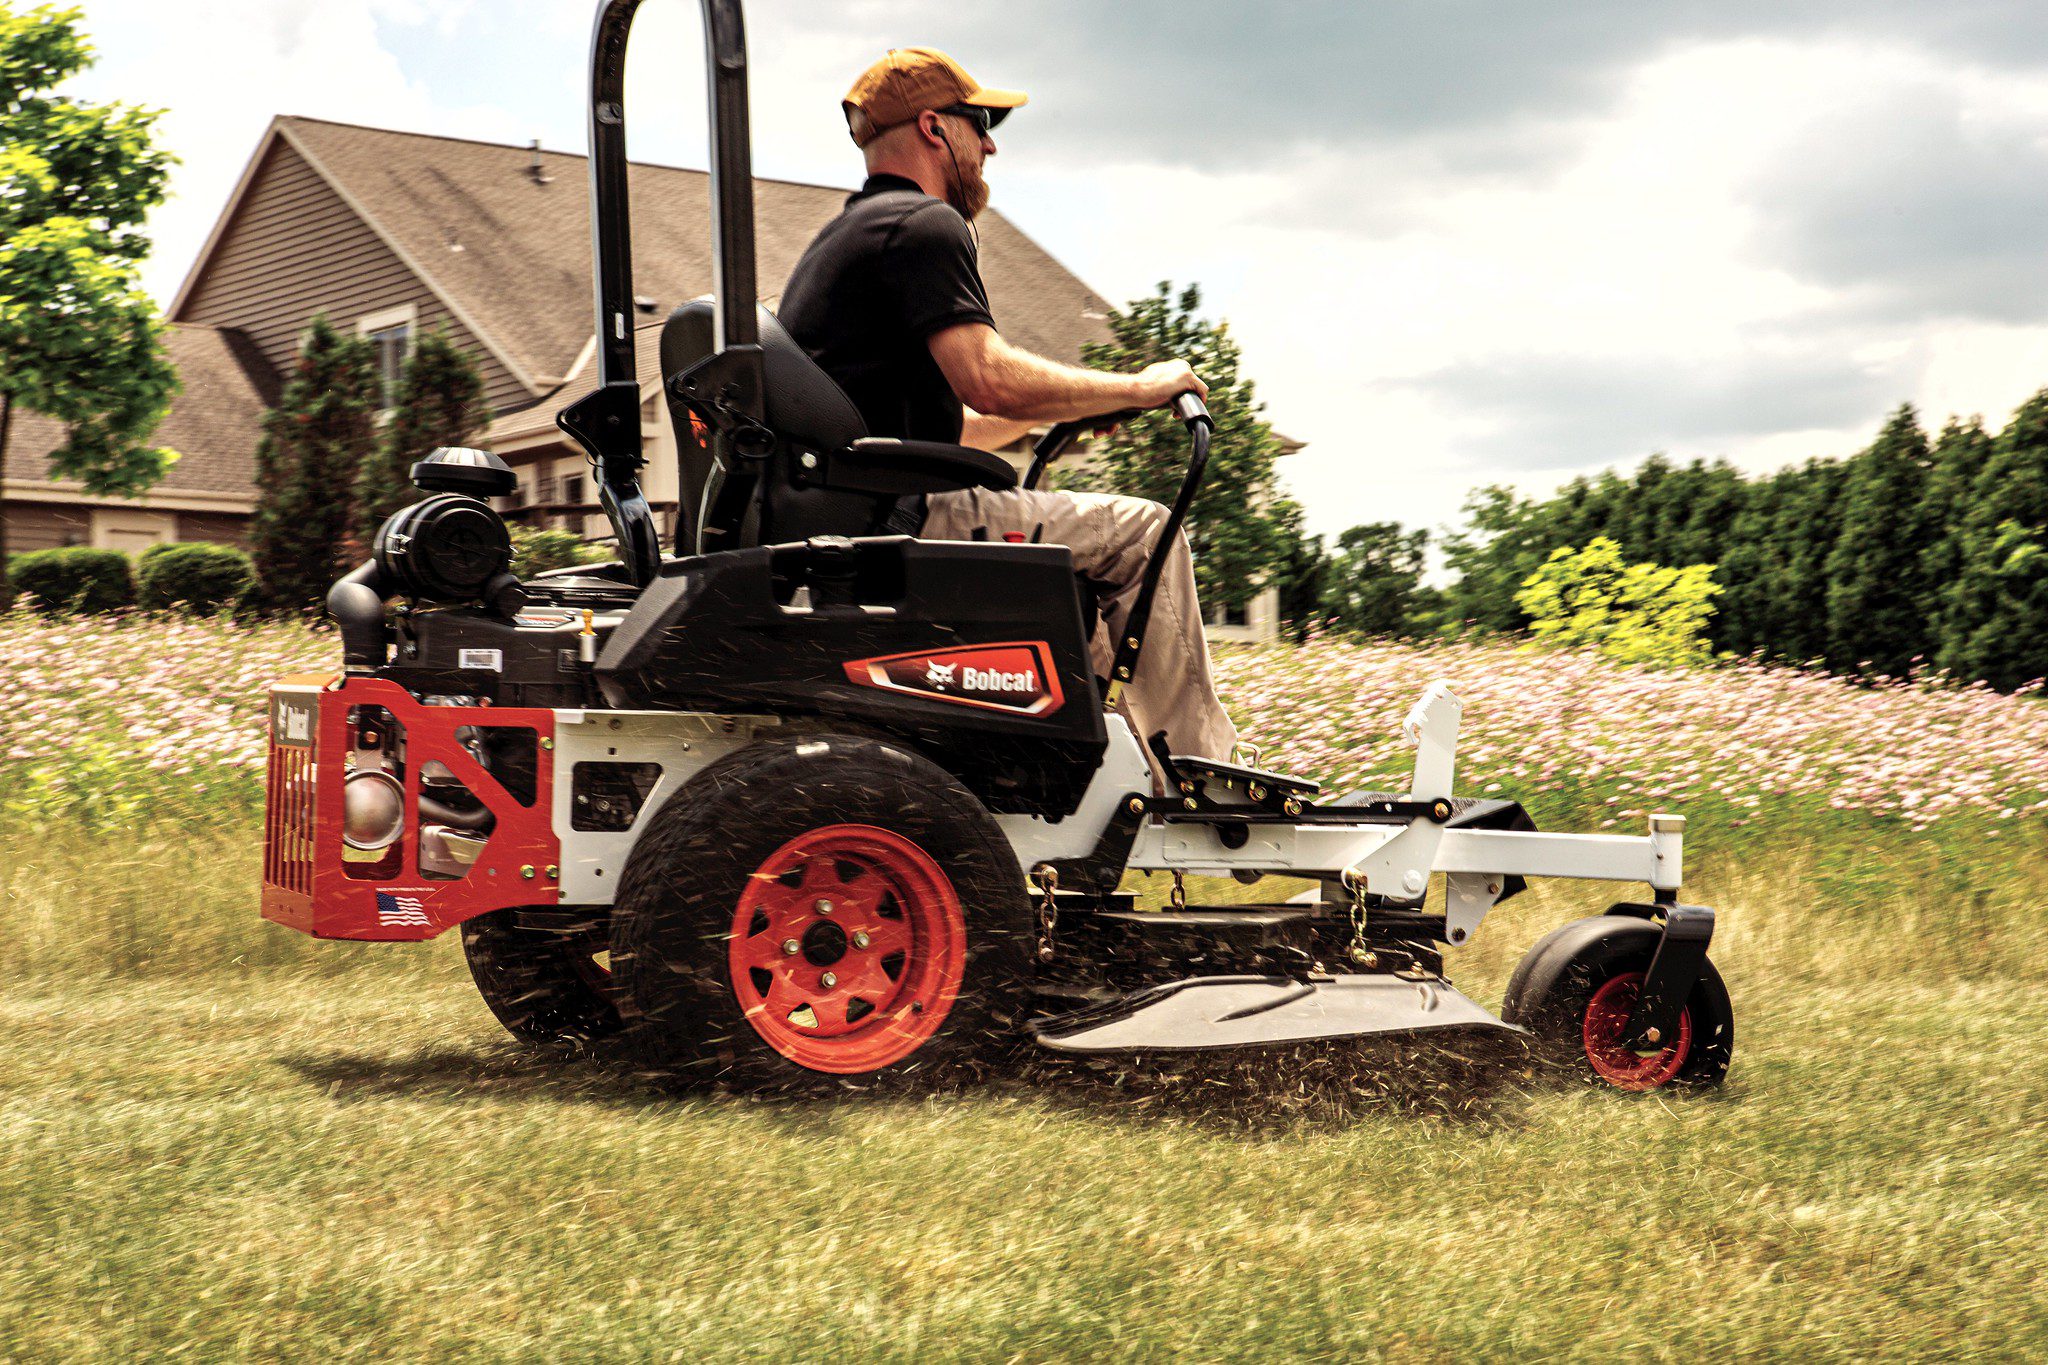 Browse Specs and more for the ZT3500 Zero-Turn Mower 52″ - Bobcat of North Texas